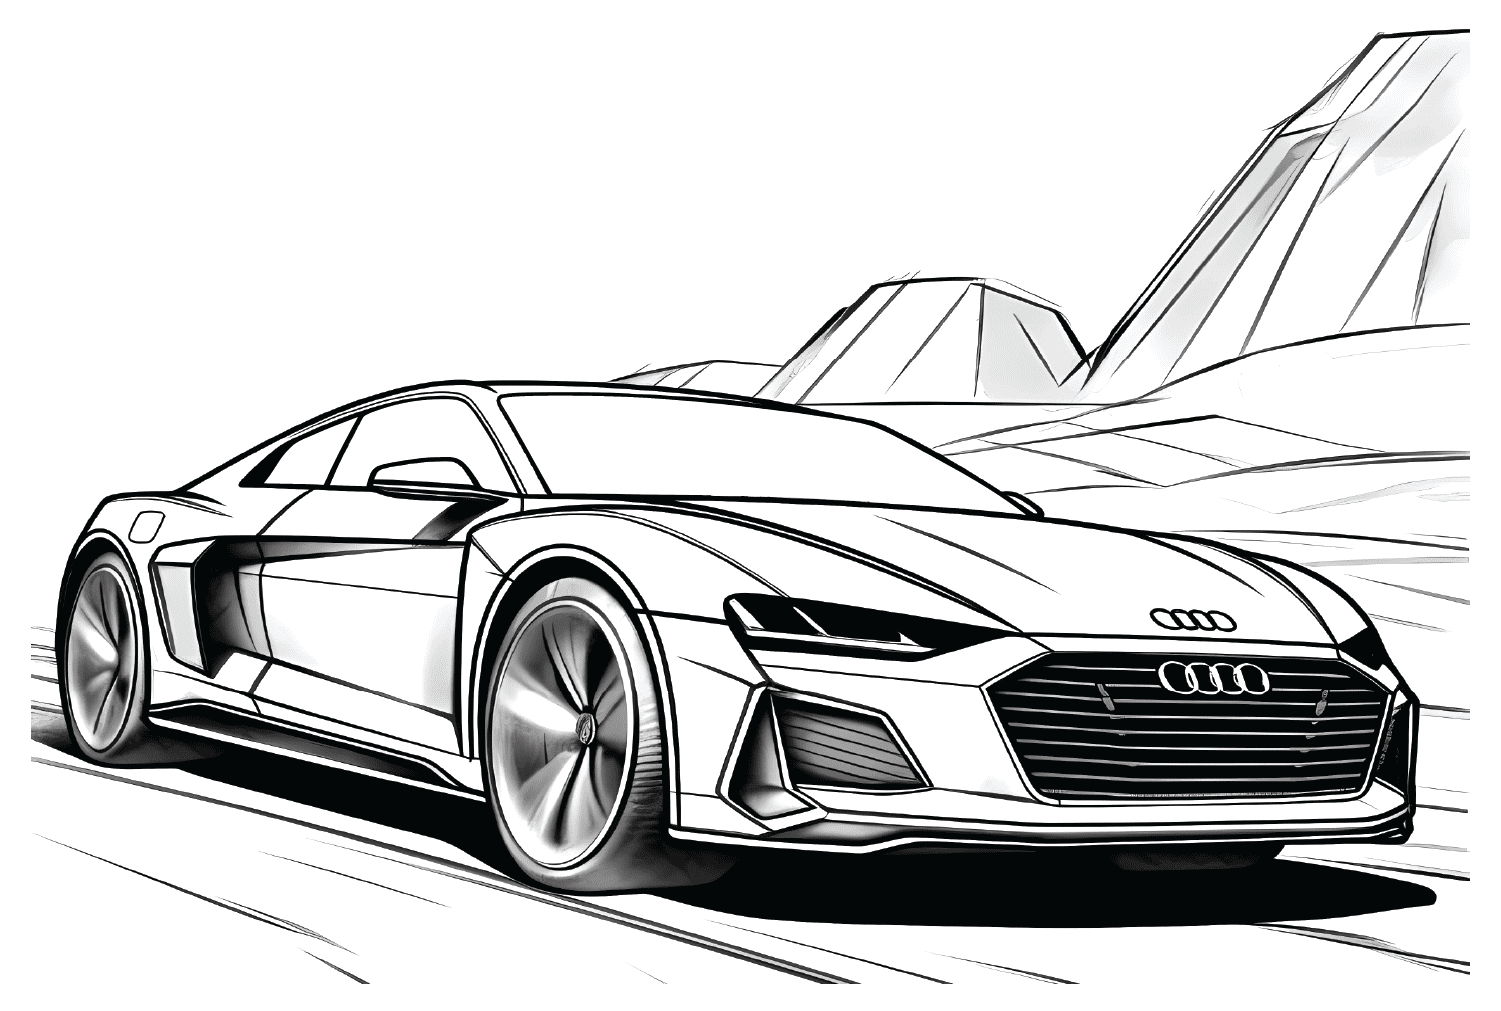 Audi e-tron GT Coloring Page from Audi